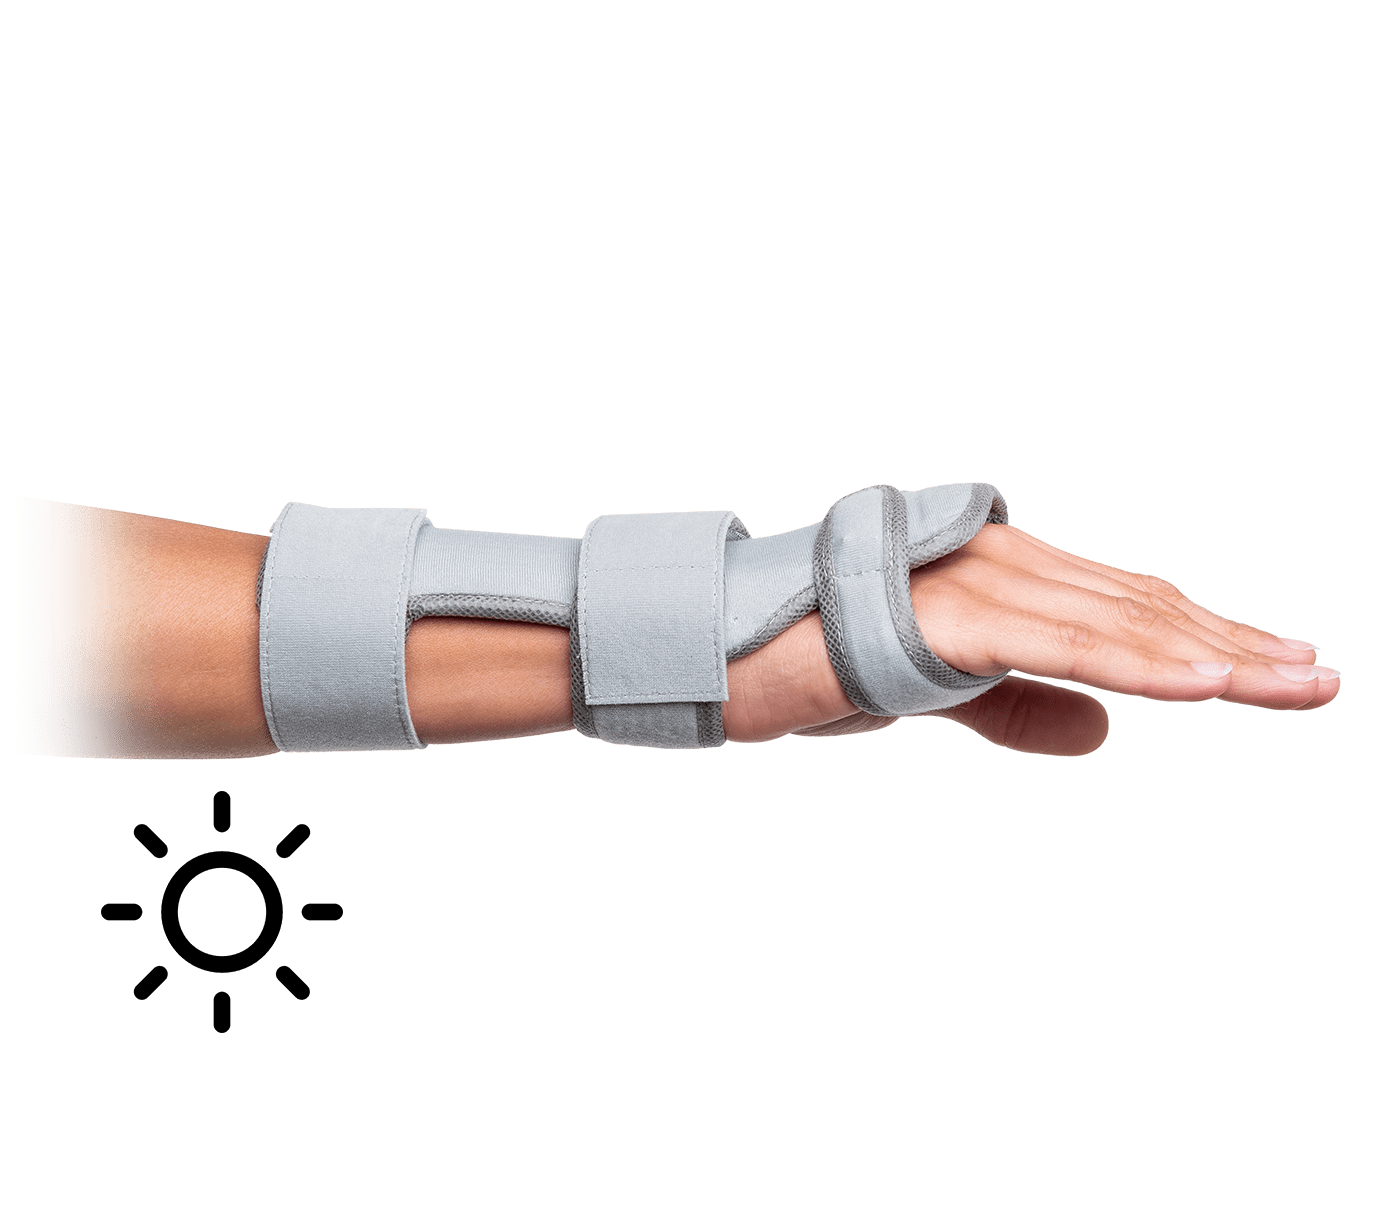 Universal working splint for wrist & Carpal Tunnel Syndrome - Day use